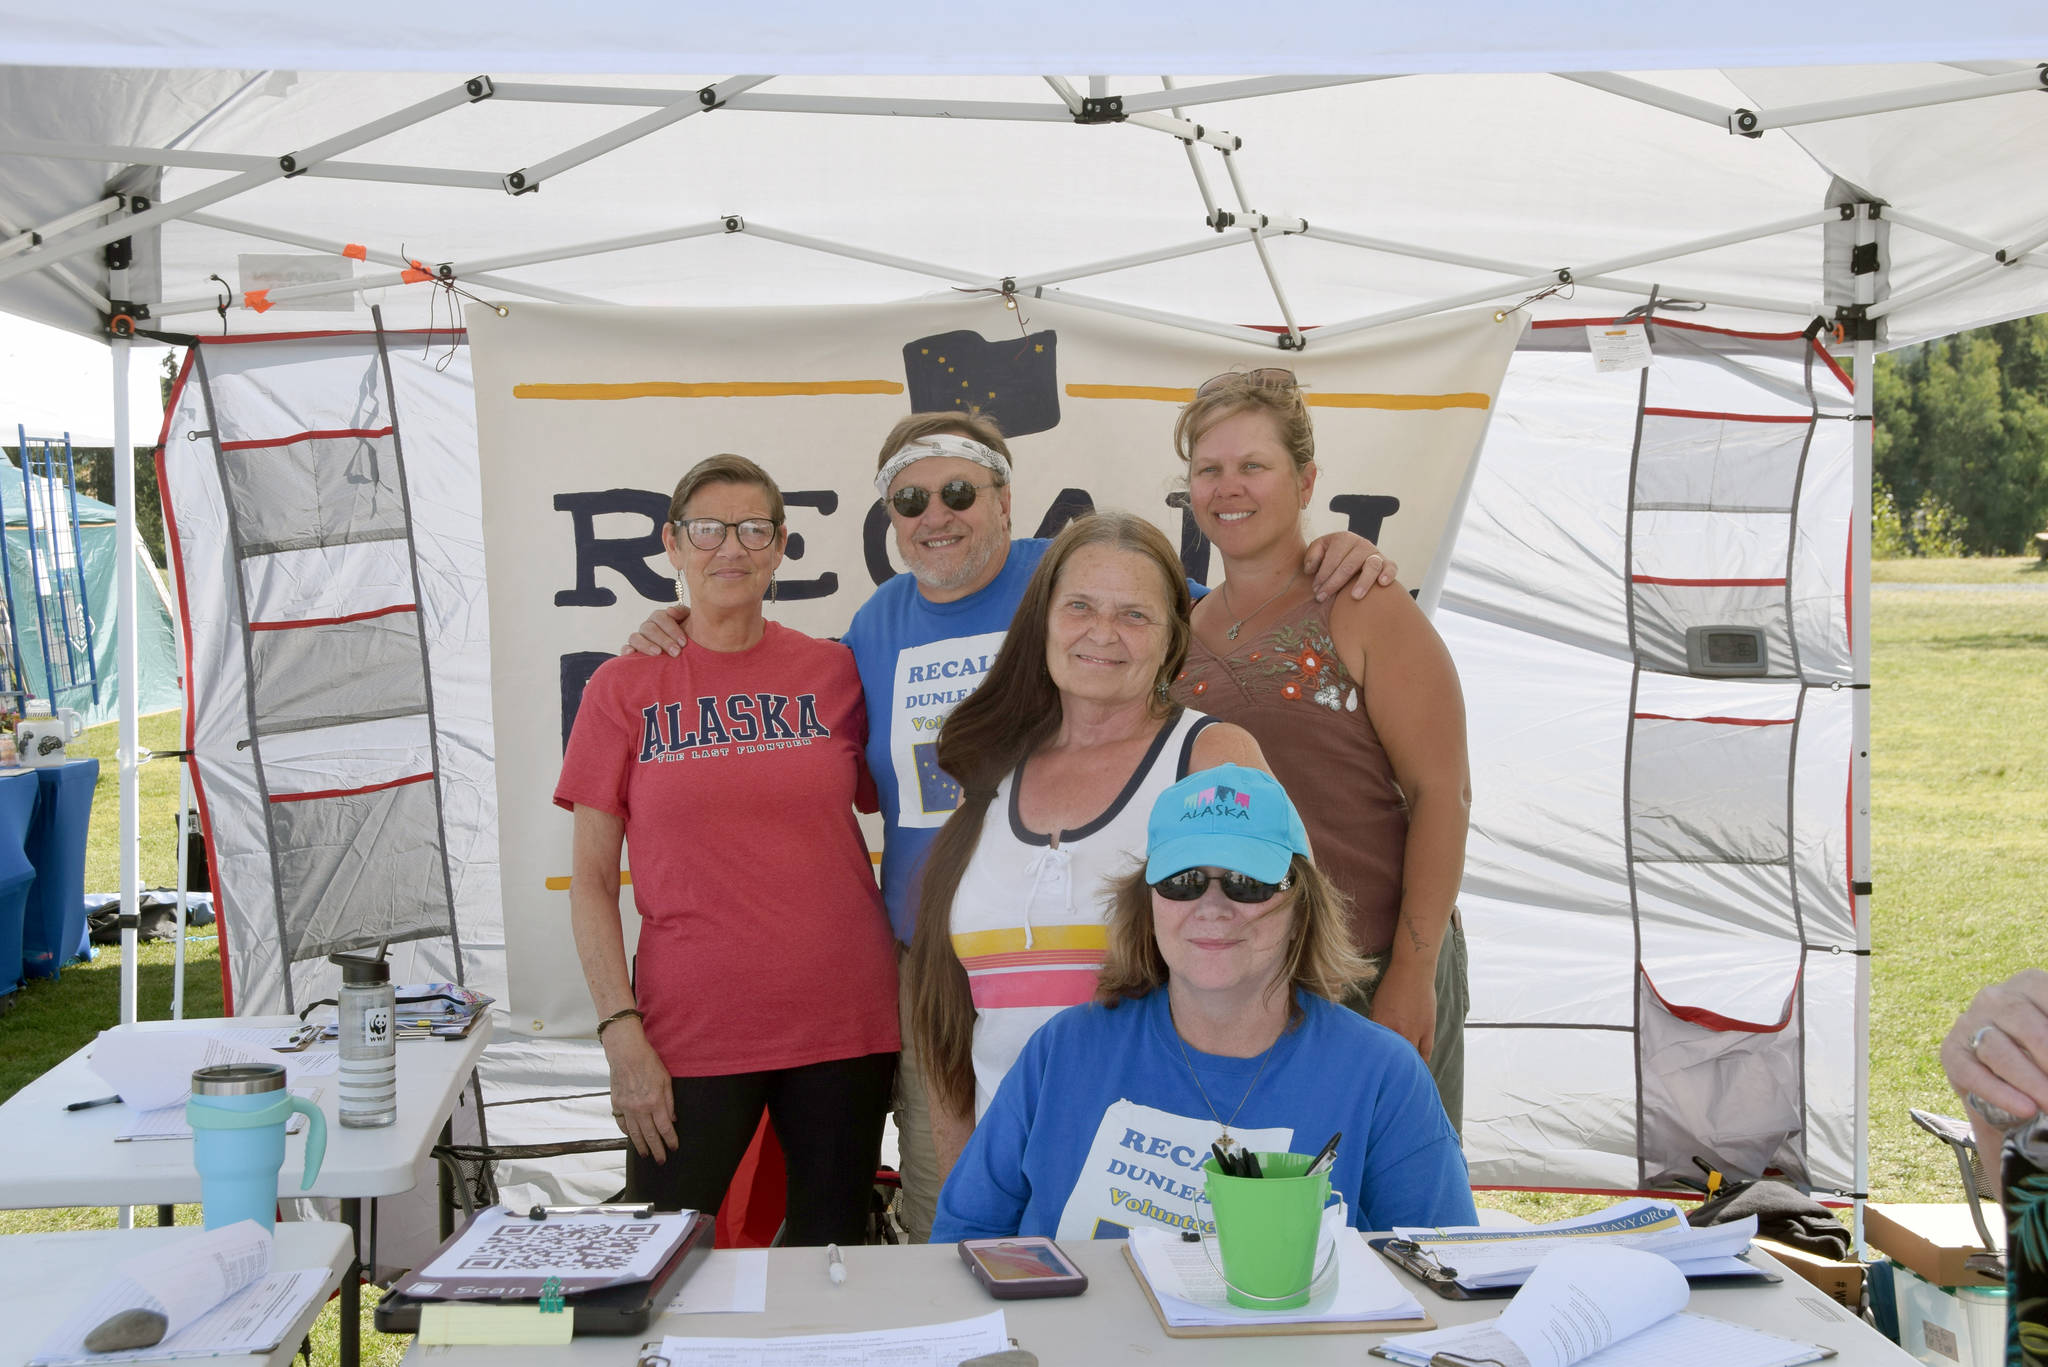 From left, Michele Vasquez, Eric Trieder, Fay Herold, Nelma Treider and Karyn Griffin smile for a photo while collecting signatures to recall Governor Mike Dunleavy in Soldotna Creek Park on Aug. 7, 2019. (Photo by Brian Mazurek/Peninsula Clarion)